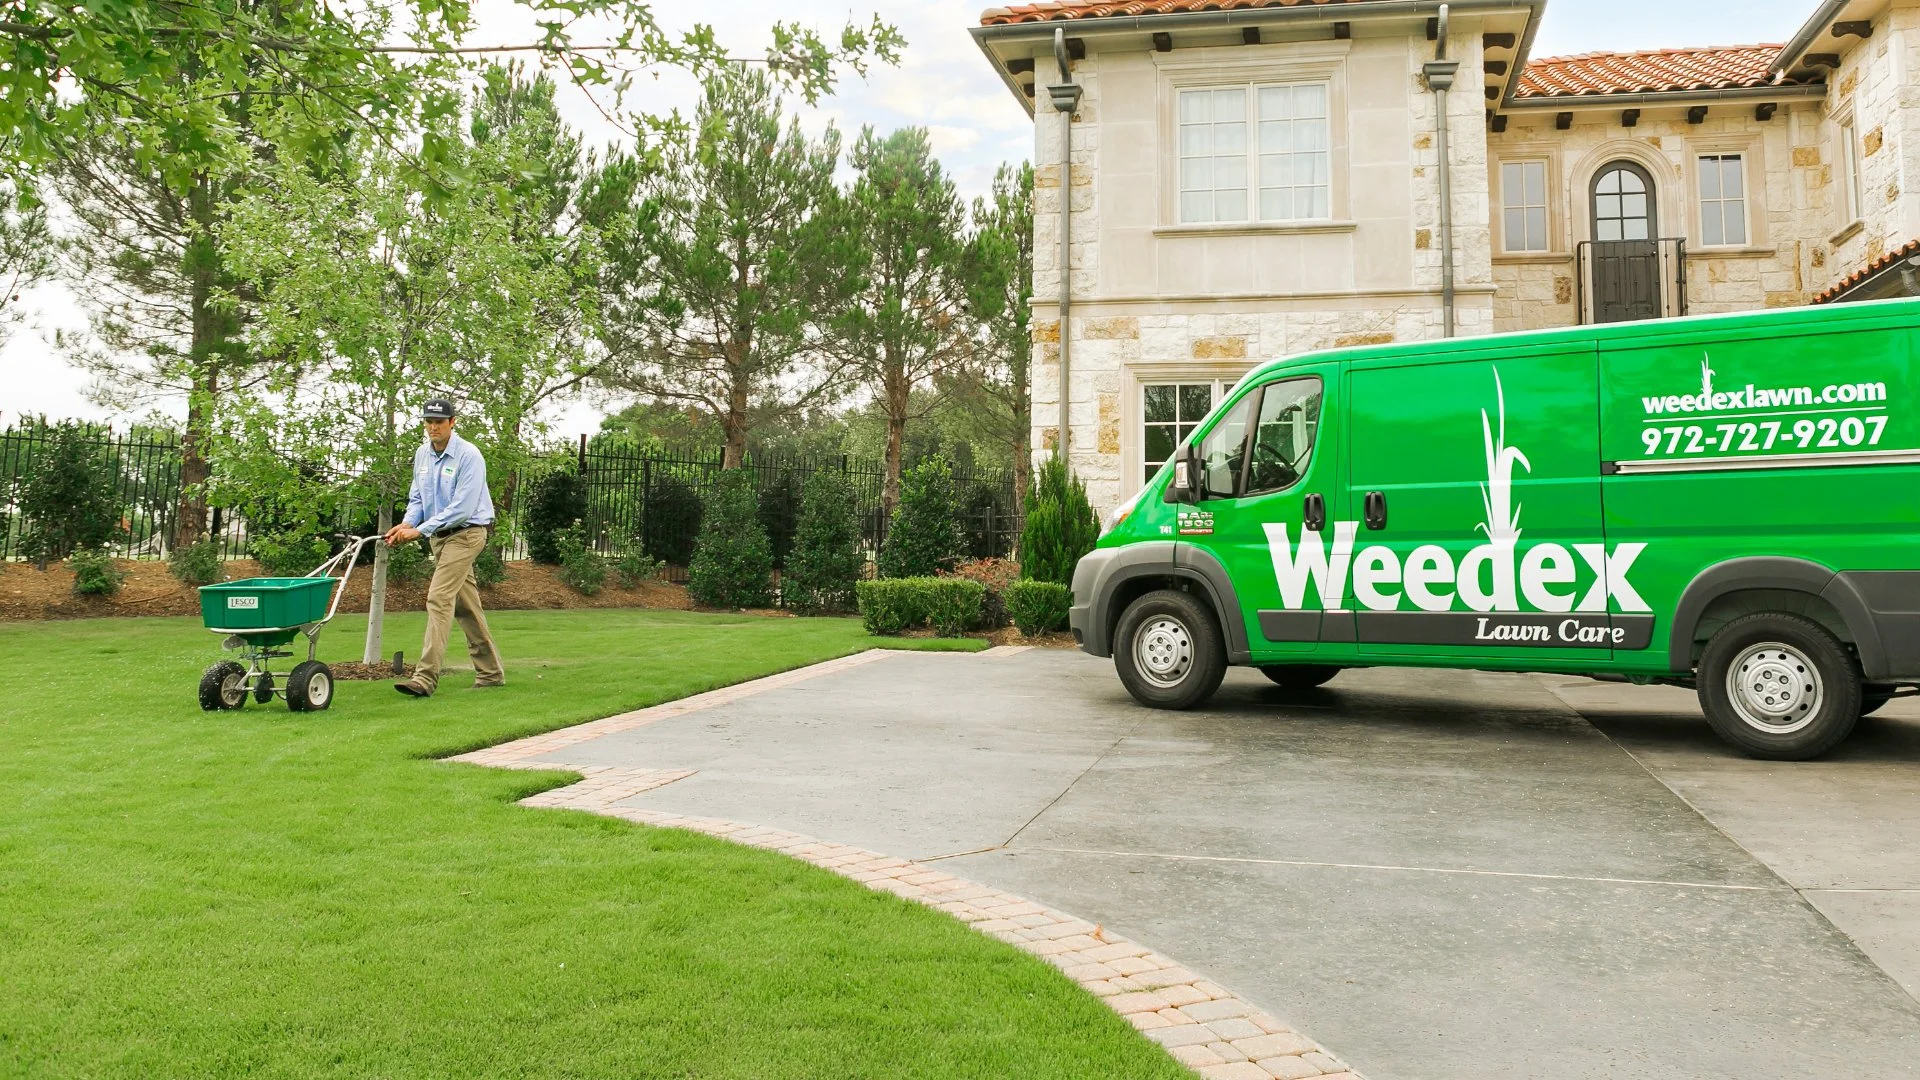 Don’t Forget to Have Your Lawn Fertilized During the Spring Season!